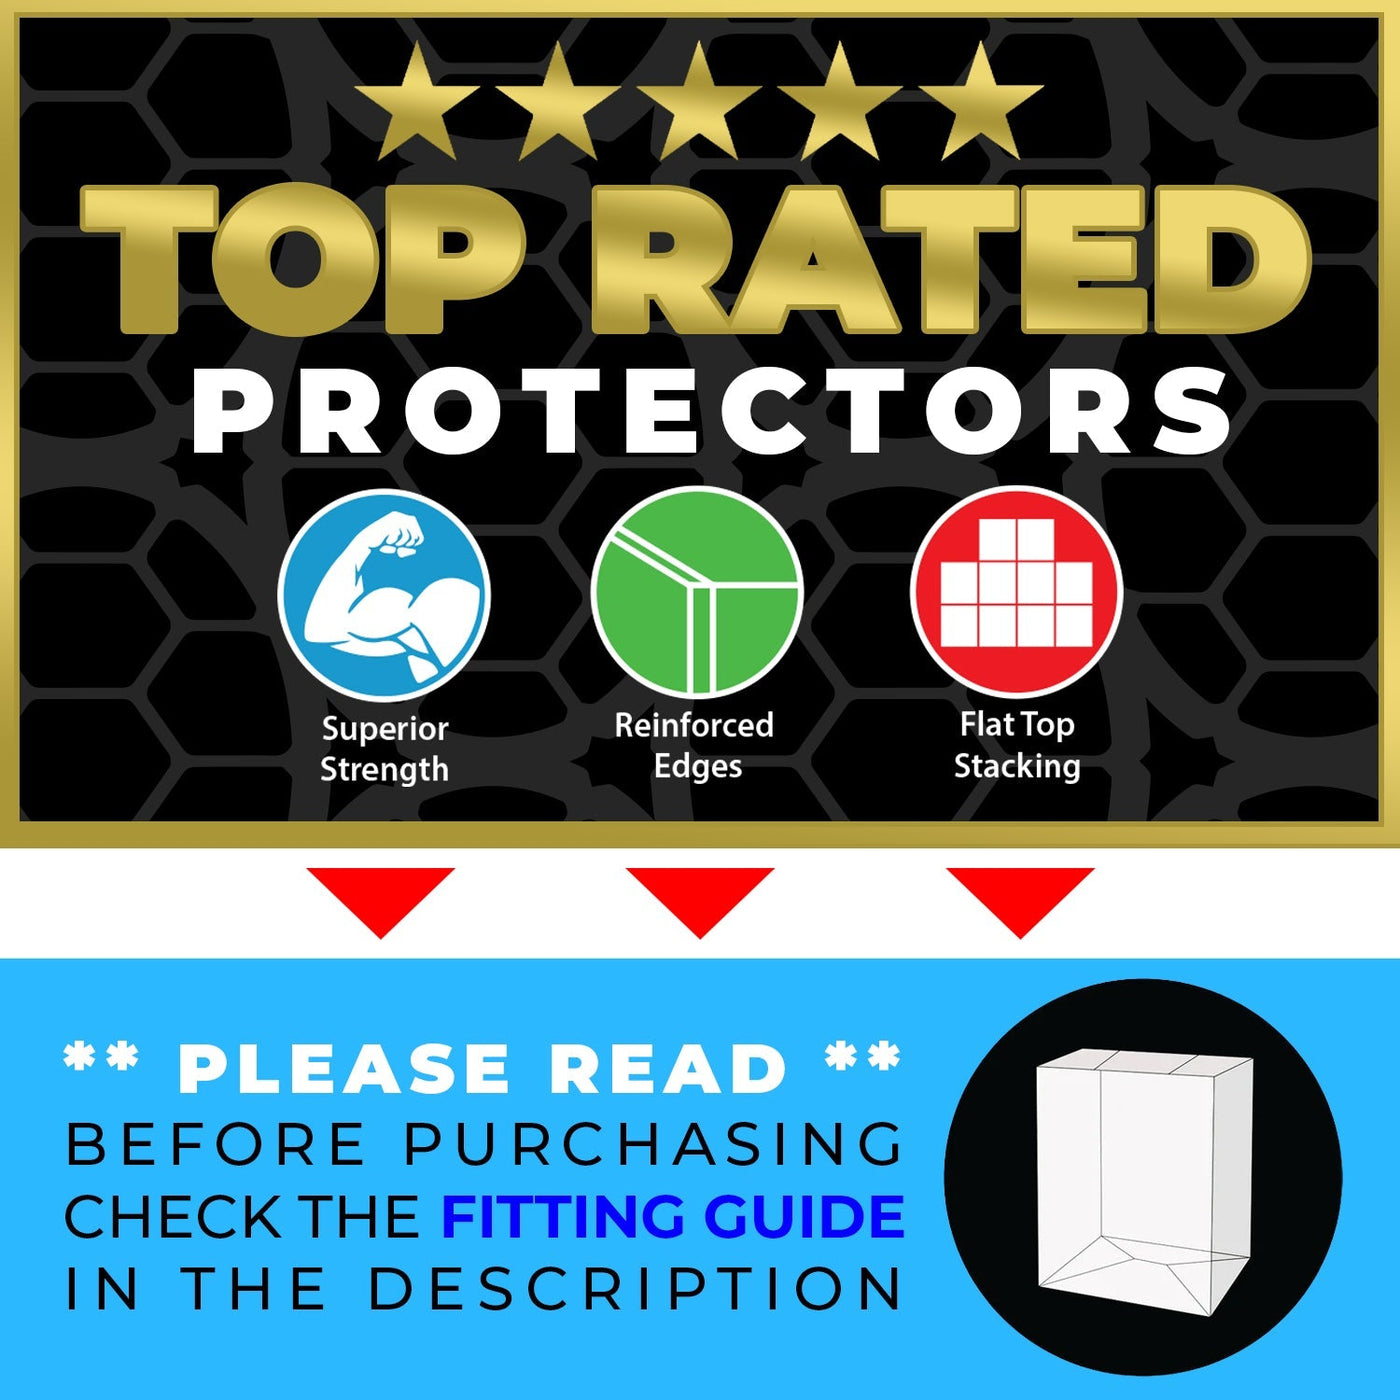 pop moment deluxe concert best funko pop protectors thick strong uv scratch flat top stack vinyl display geek plastic shield vaulted eco armor fits collect protect display case kollector protector